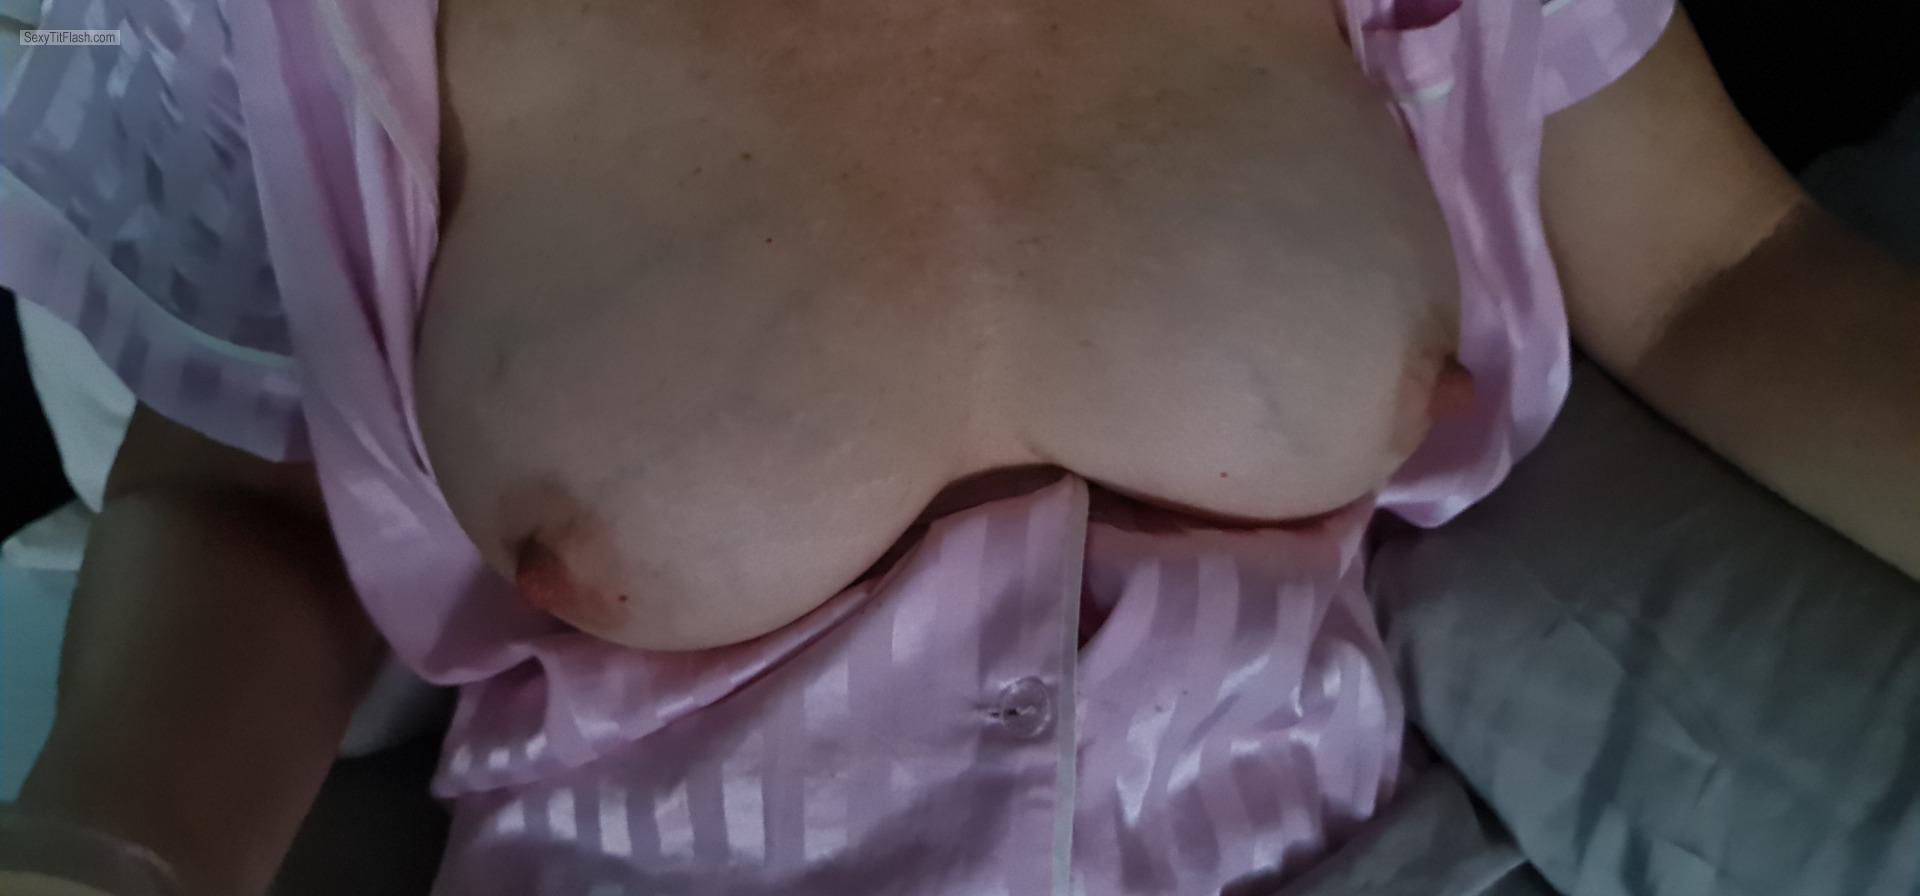 Tit Flash: Wife's Very Big Tits (Selfie) - Hot Mum from New Zealand